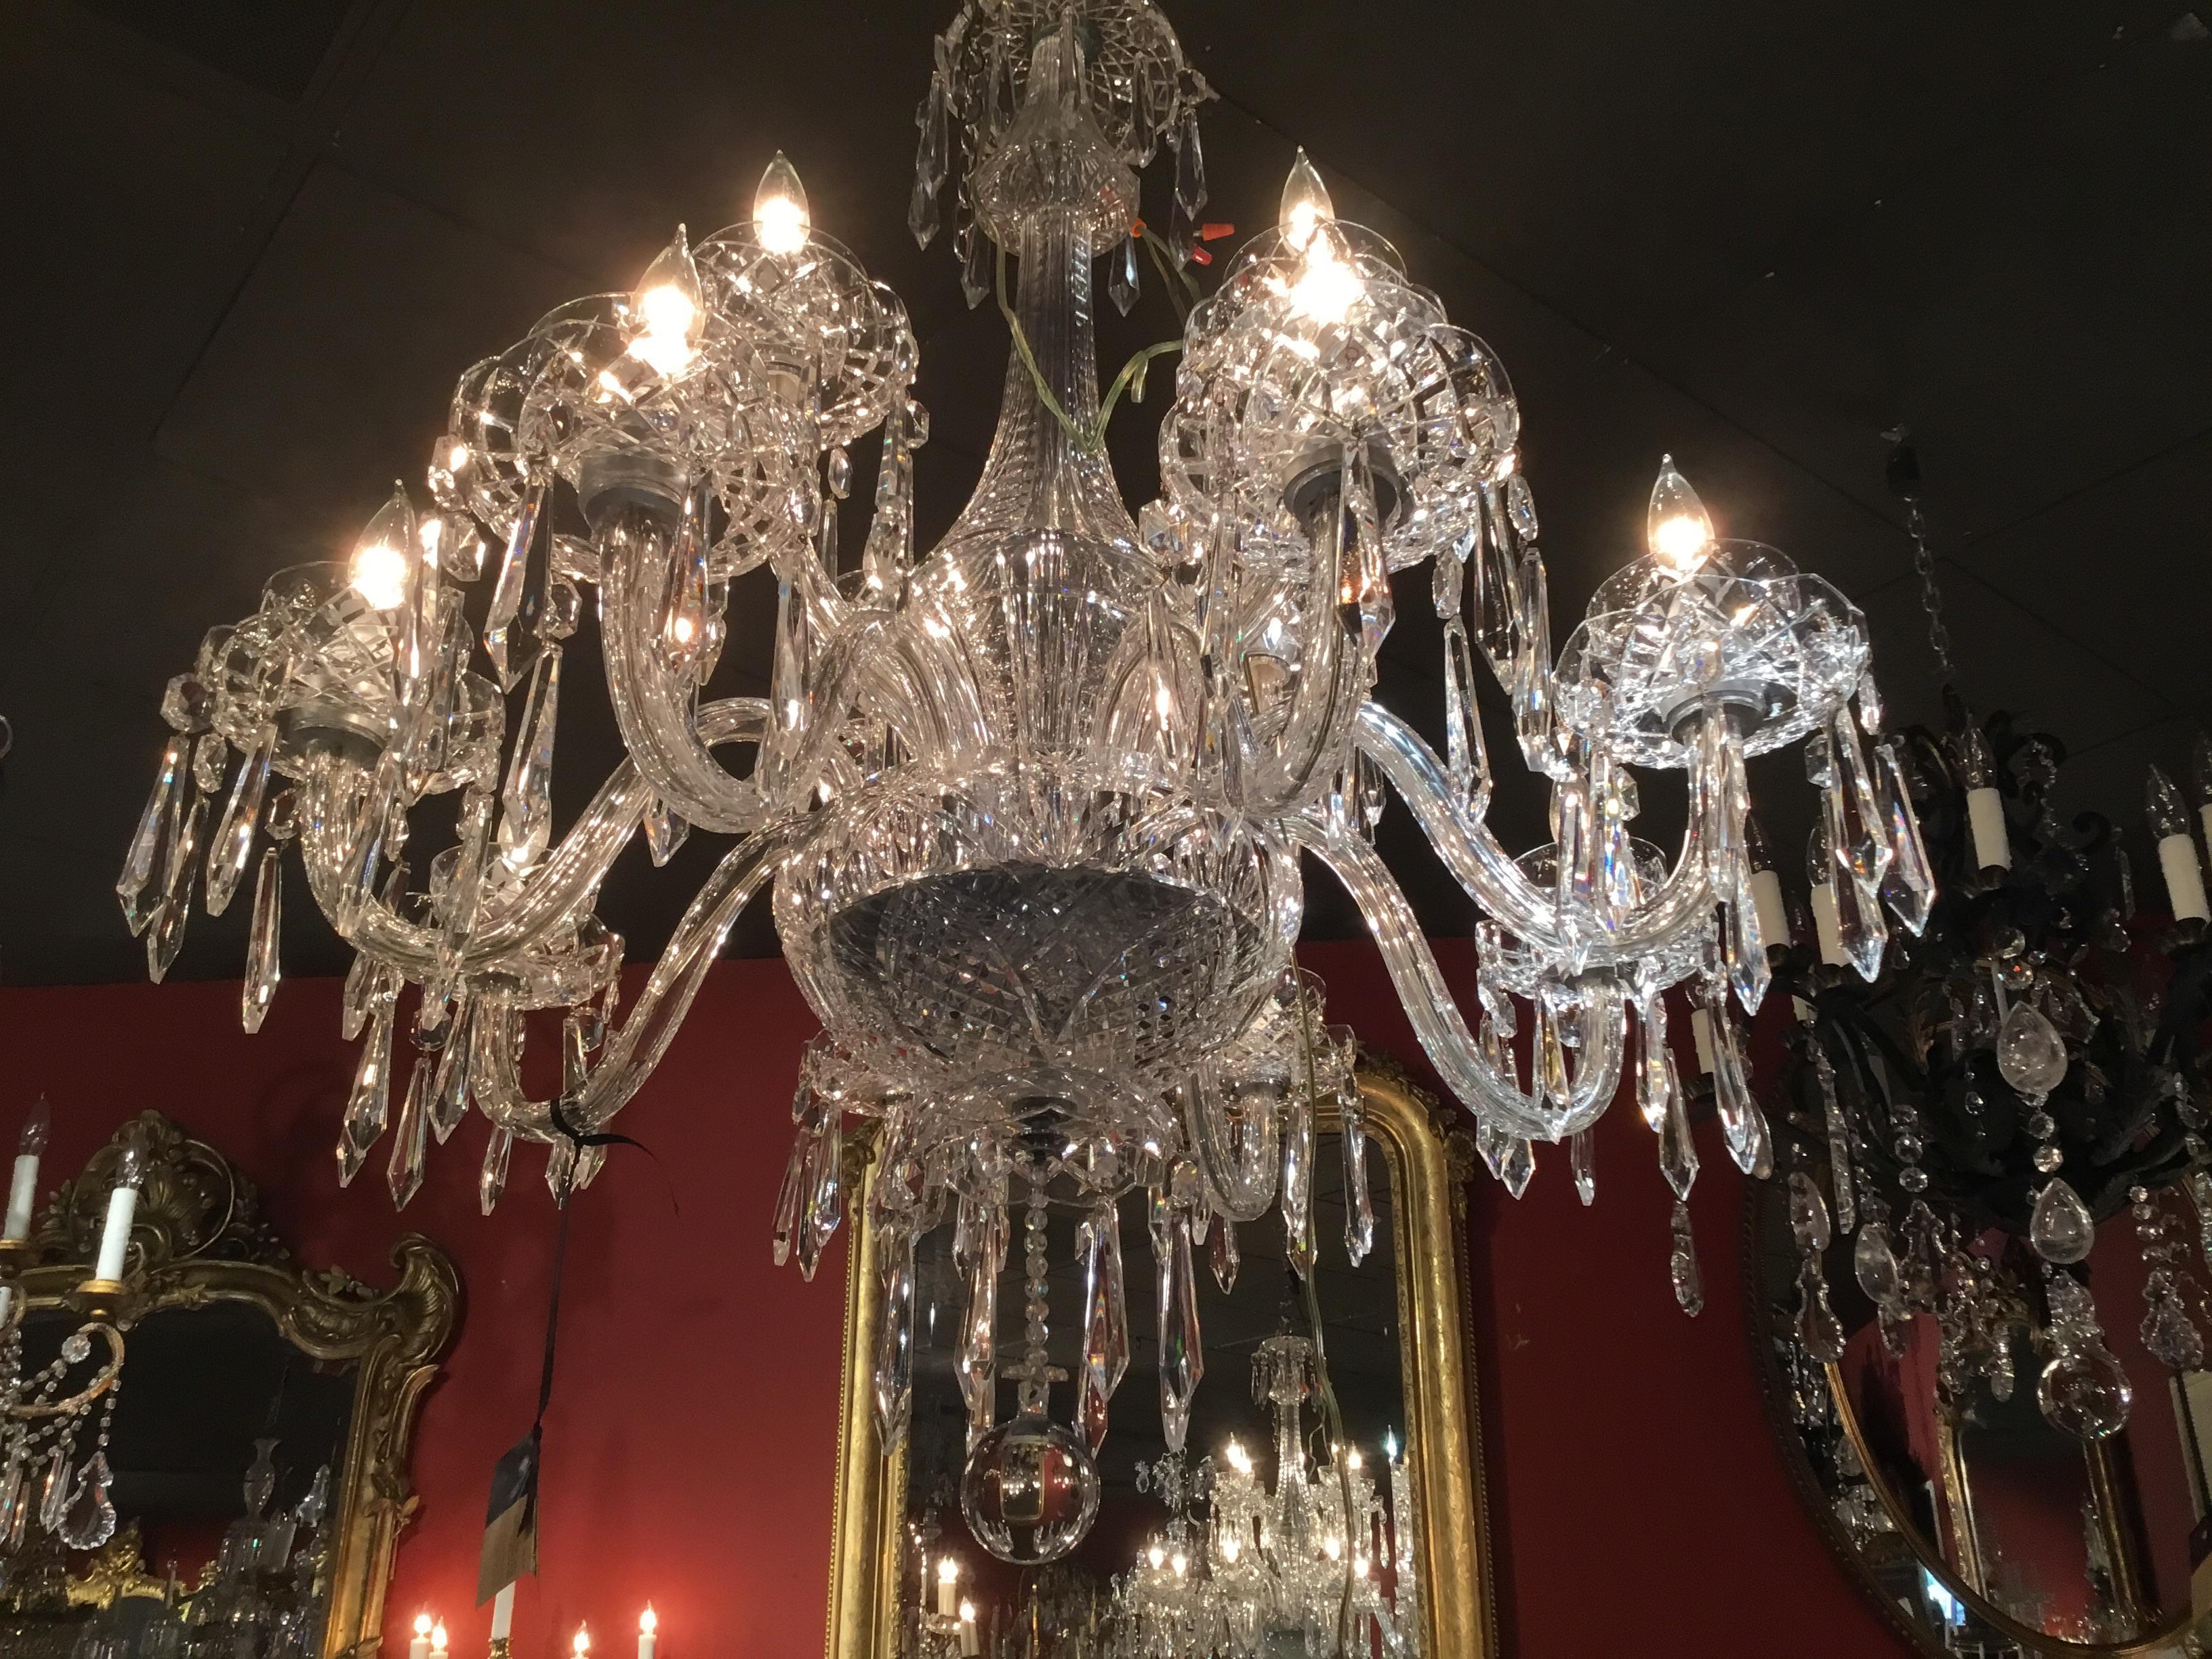 Elegant clear crystal chandelier with 12-light ensconced in 2 bobeches.
A central stem in crystal adds elegant height and beauty.